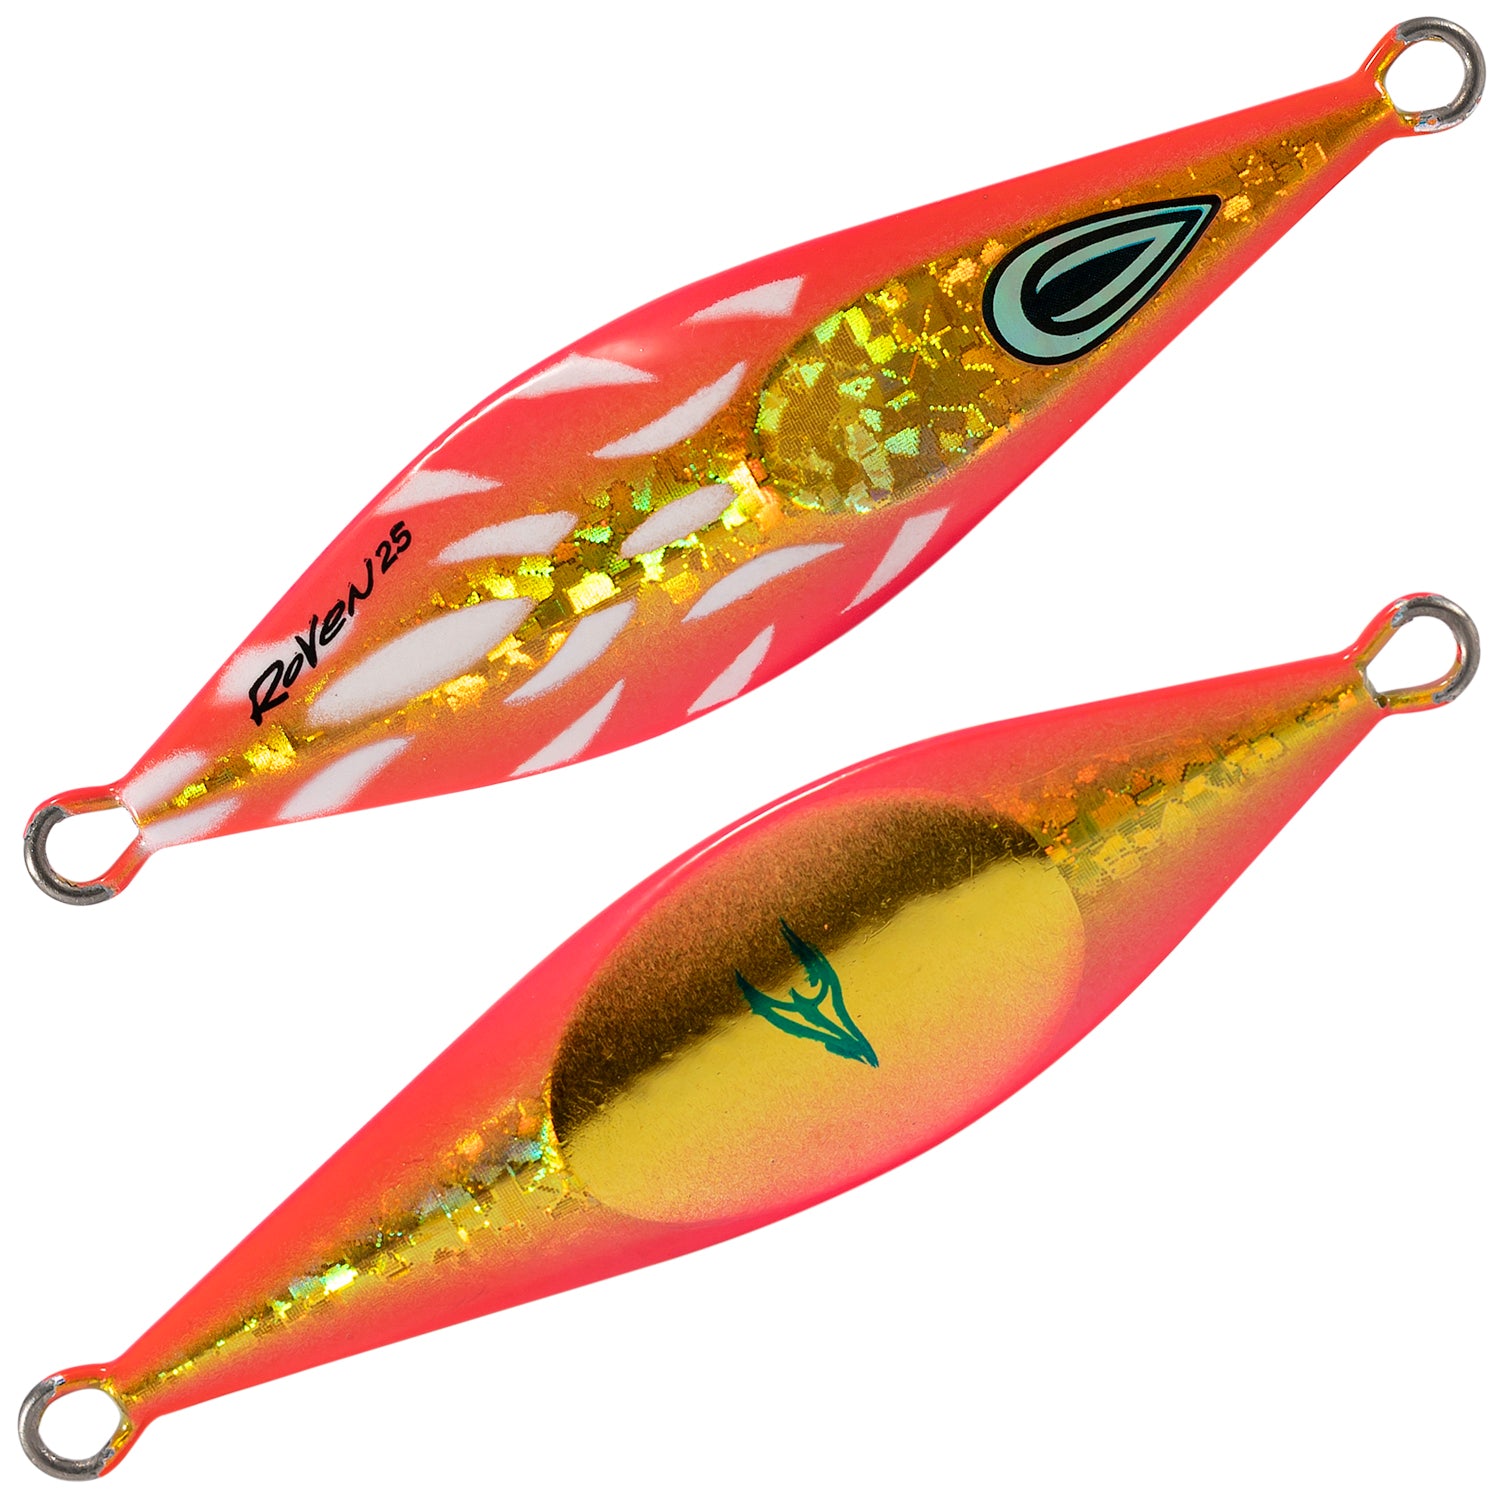 Oceans Legacy Roven Jig Rigged 15g 3